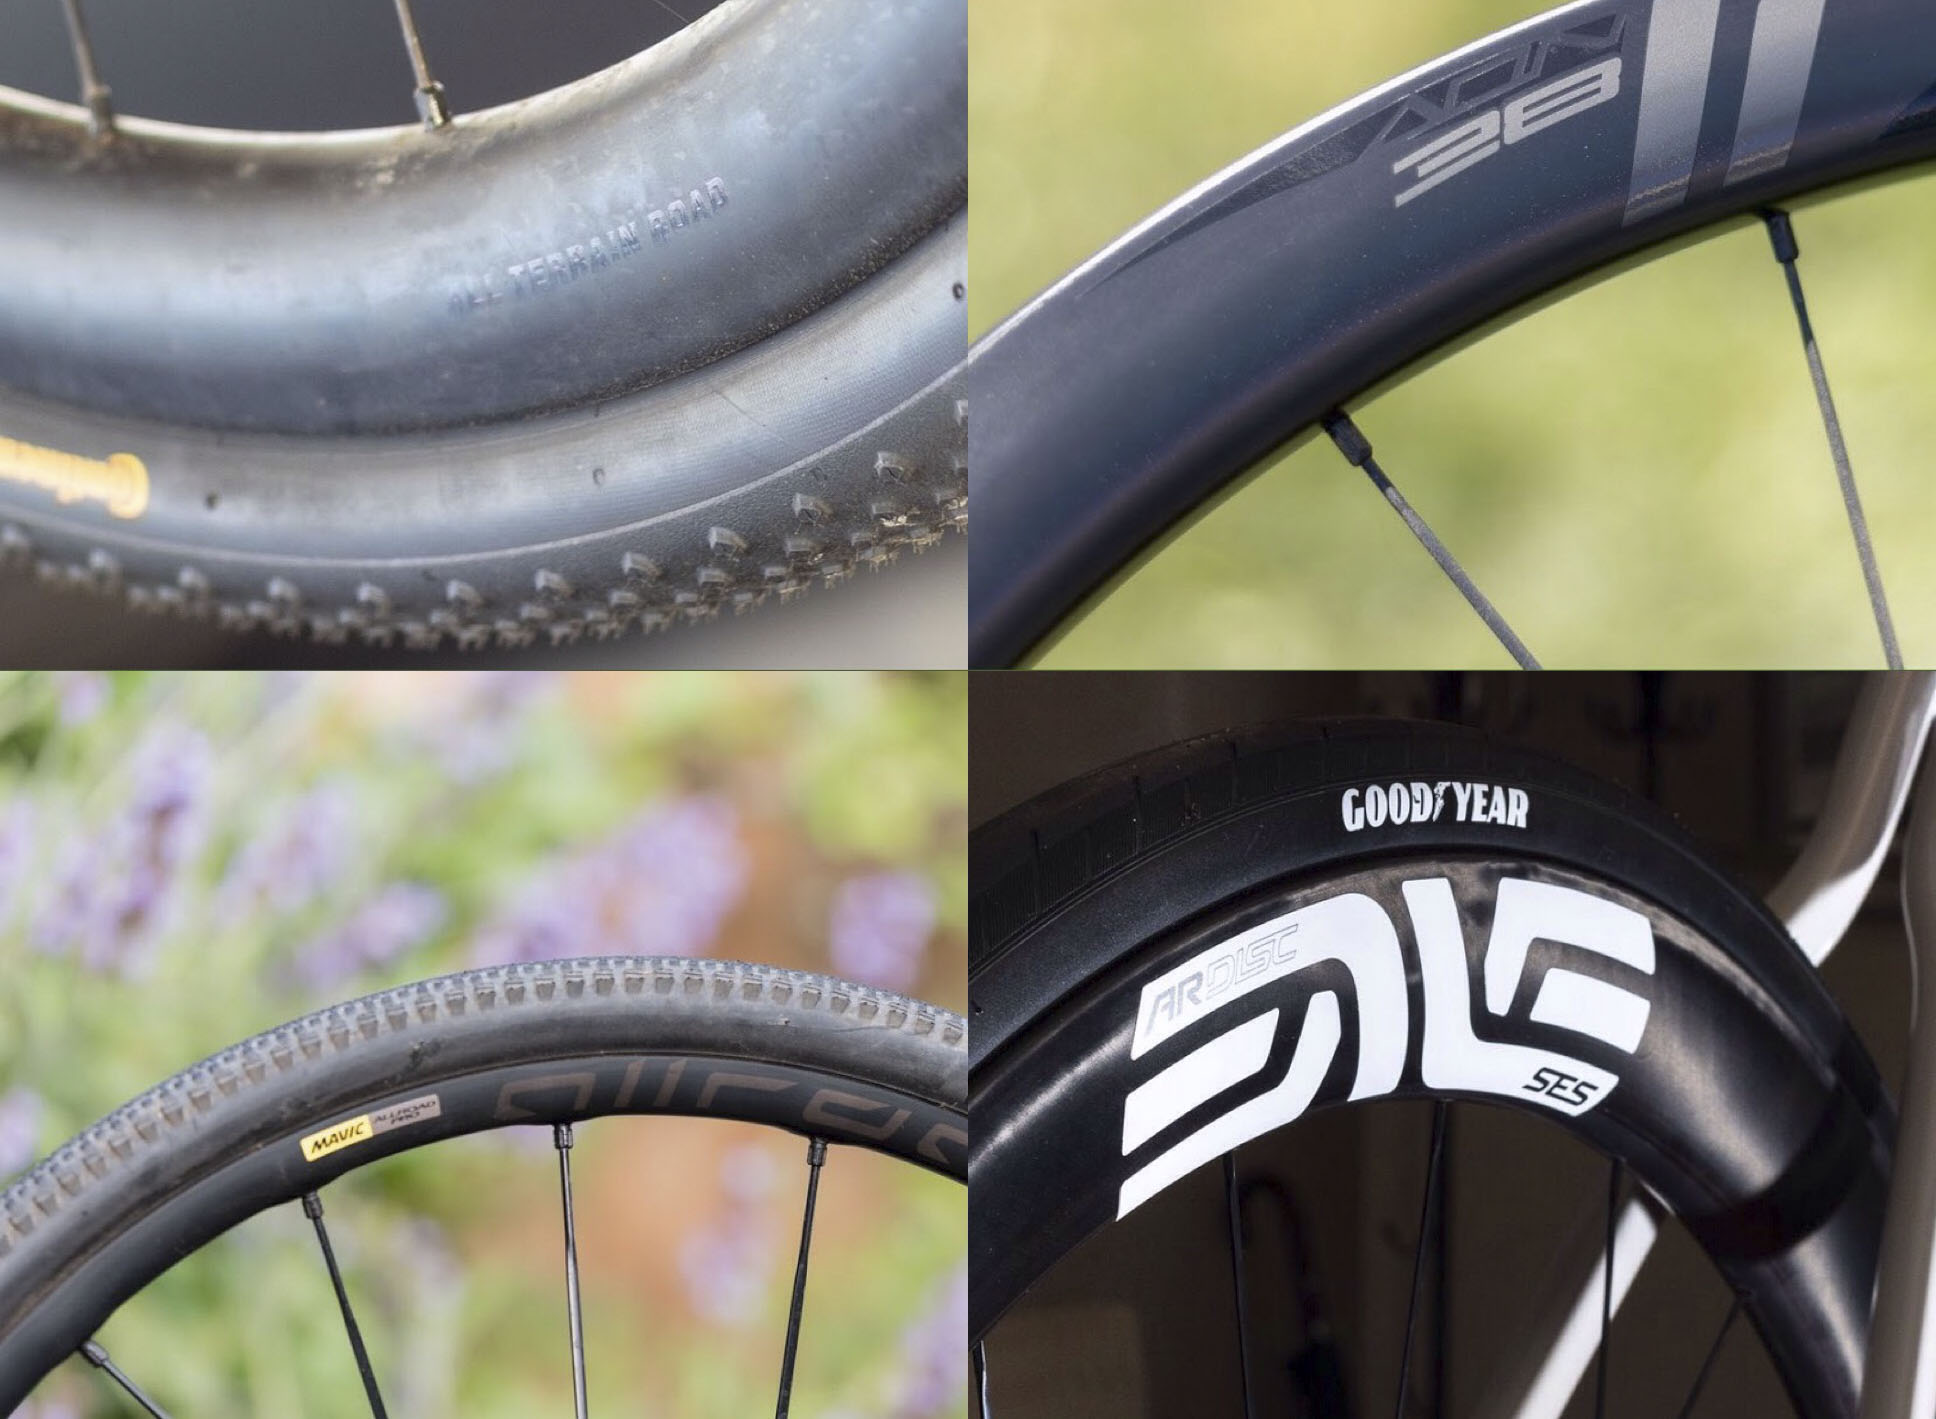 Irwin Wheels Carbon AON TLR 38 road bicycle wheels review